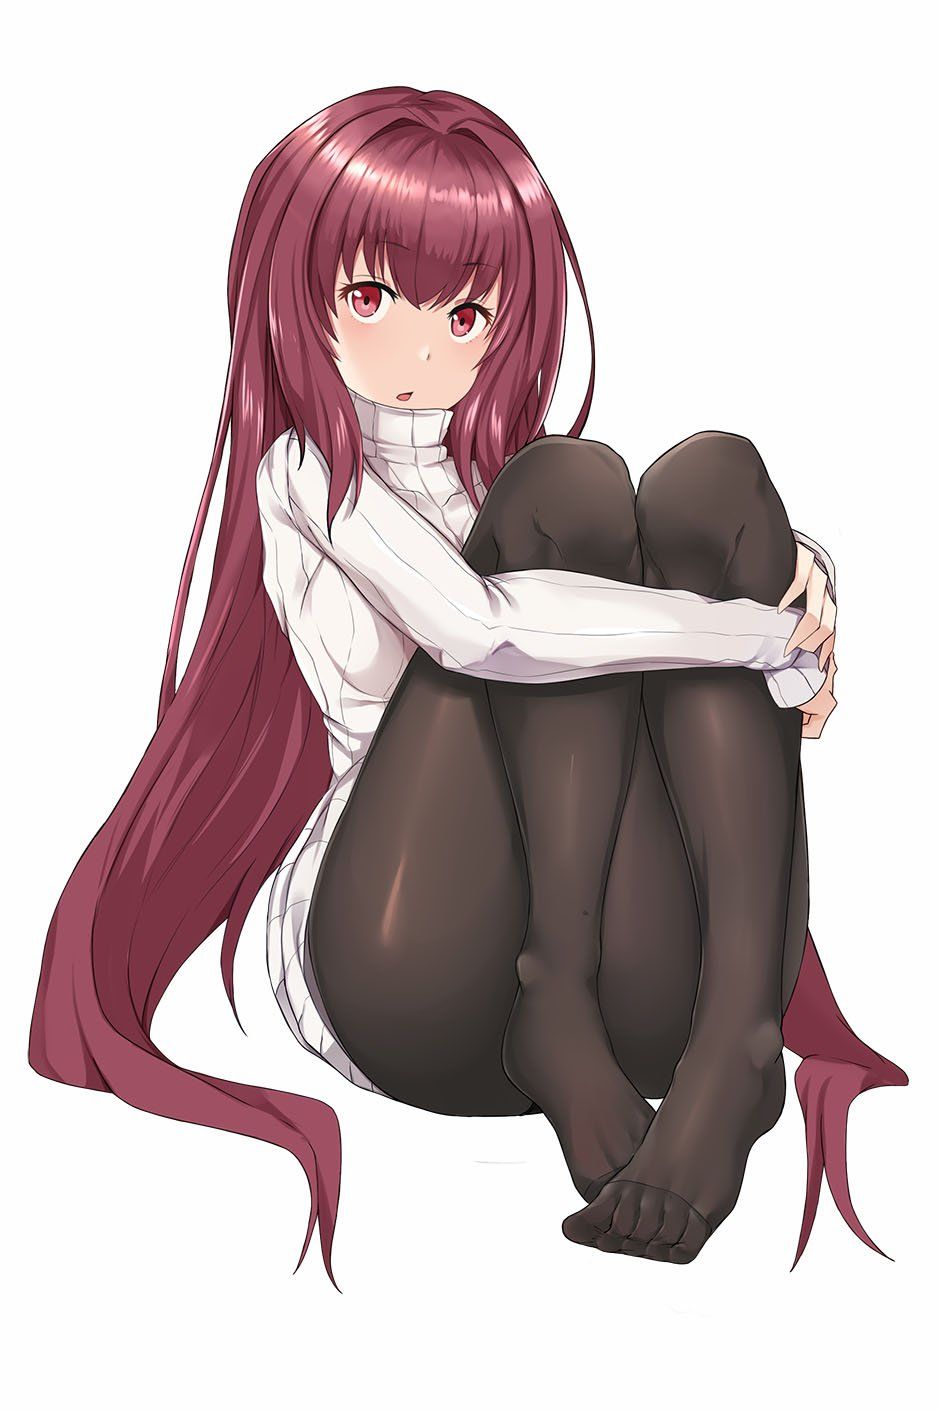 Scathach - Photo #507